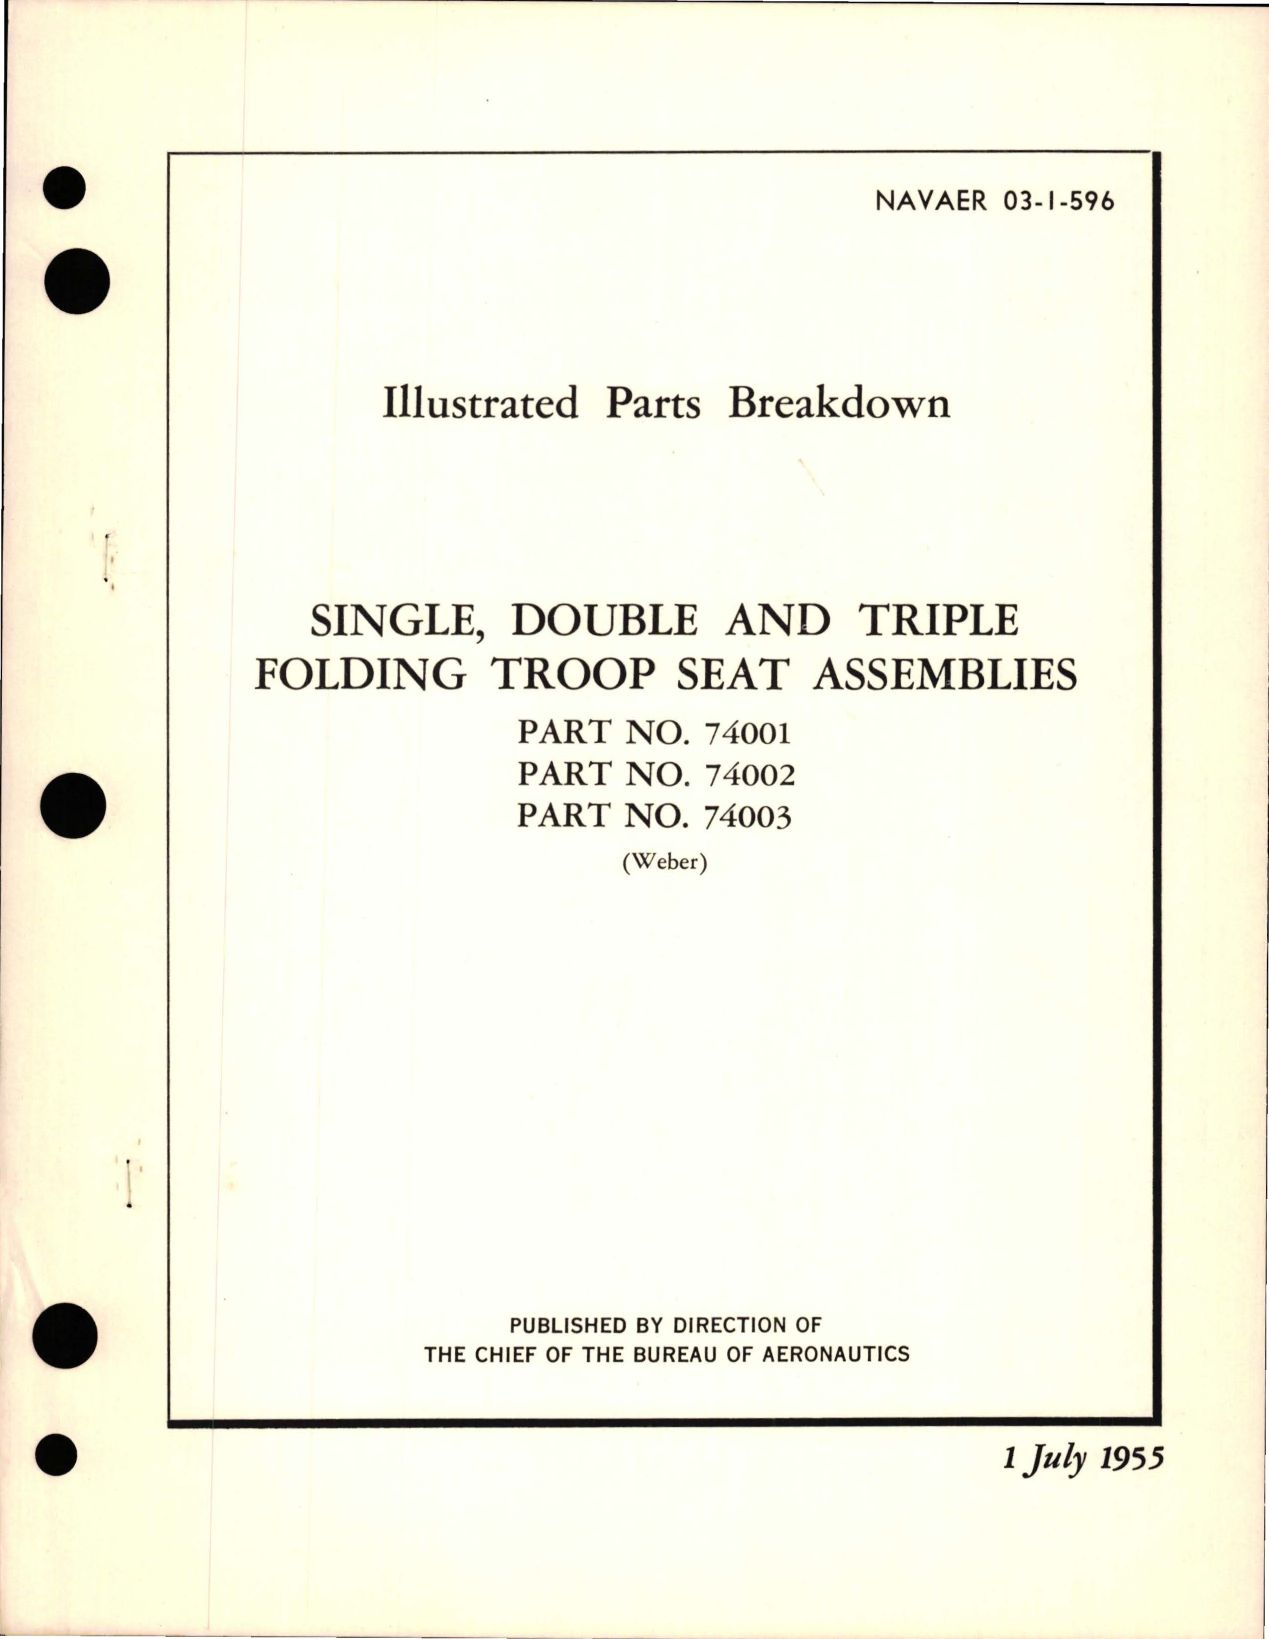 Sample page 1 from AirCorps Library document: Illustrated Parts Breakdown for Single, Double, and Triple Folding Troop Seat Assemblies - Parts 74001, 74002, and 74003